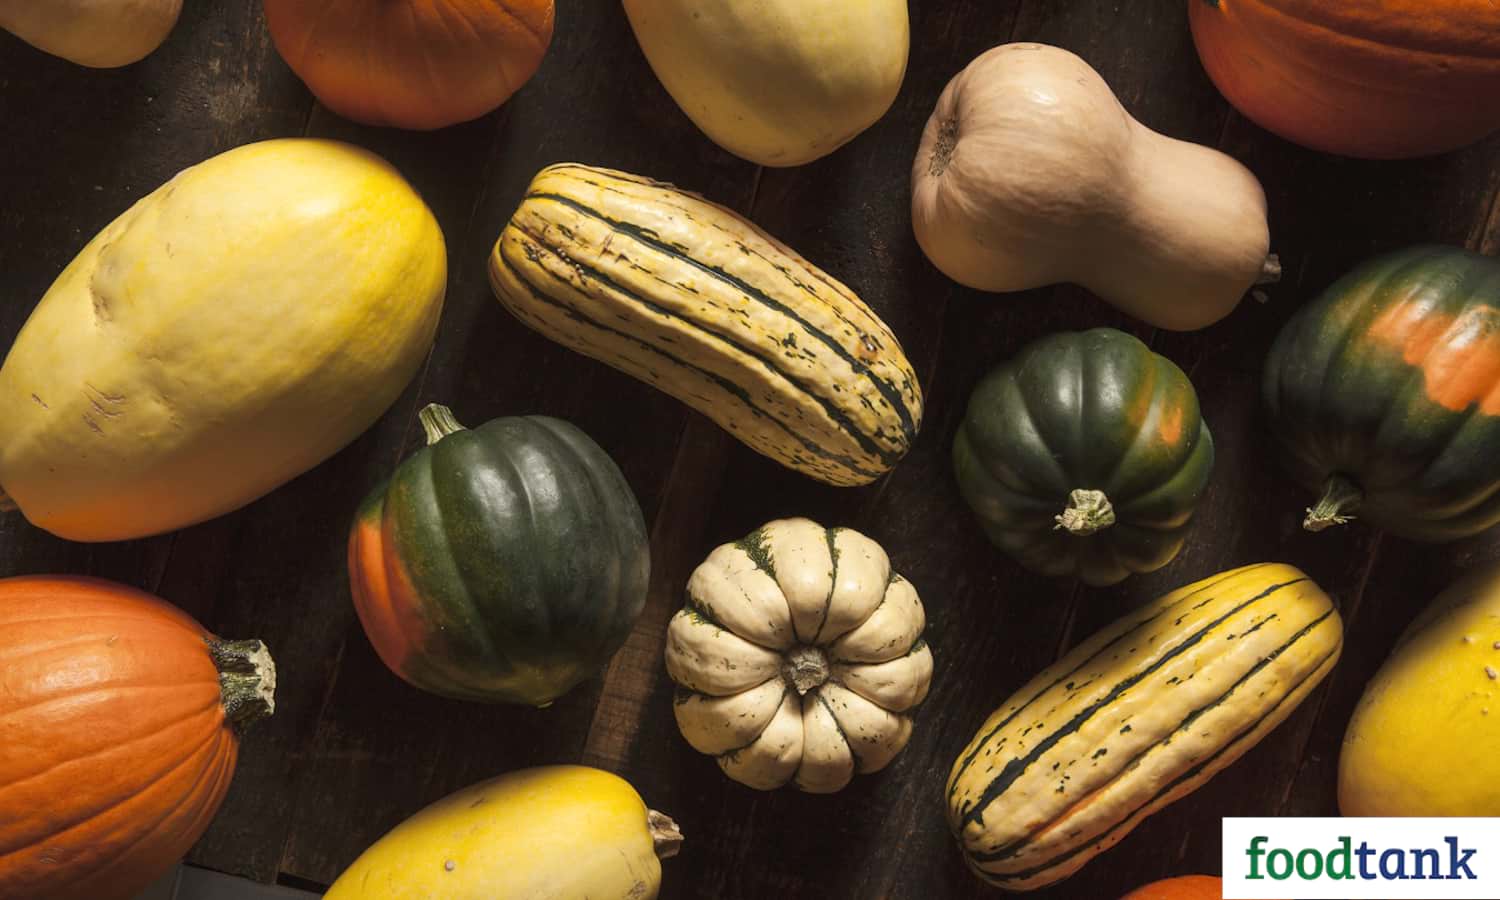 The Seasonal Food Guide and app educates about in-season produce based on the user’s location to encourage seasonal eating.